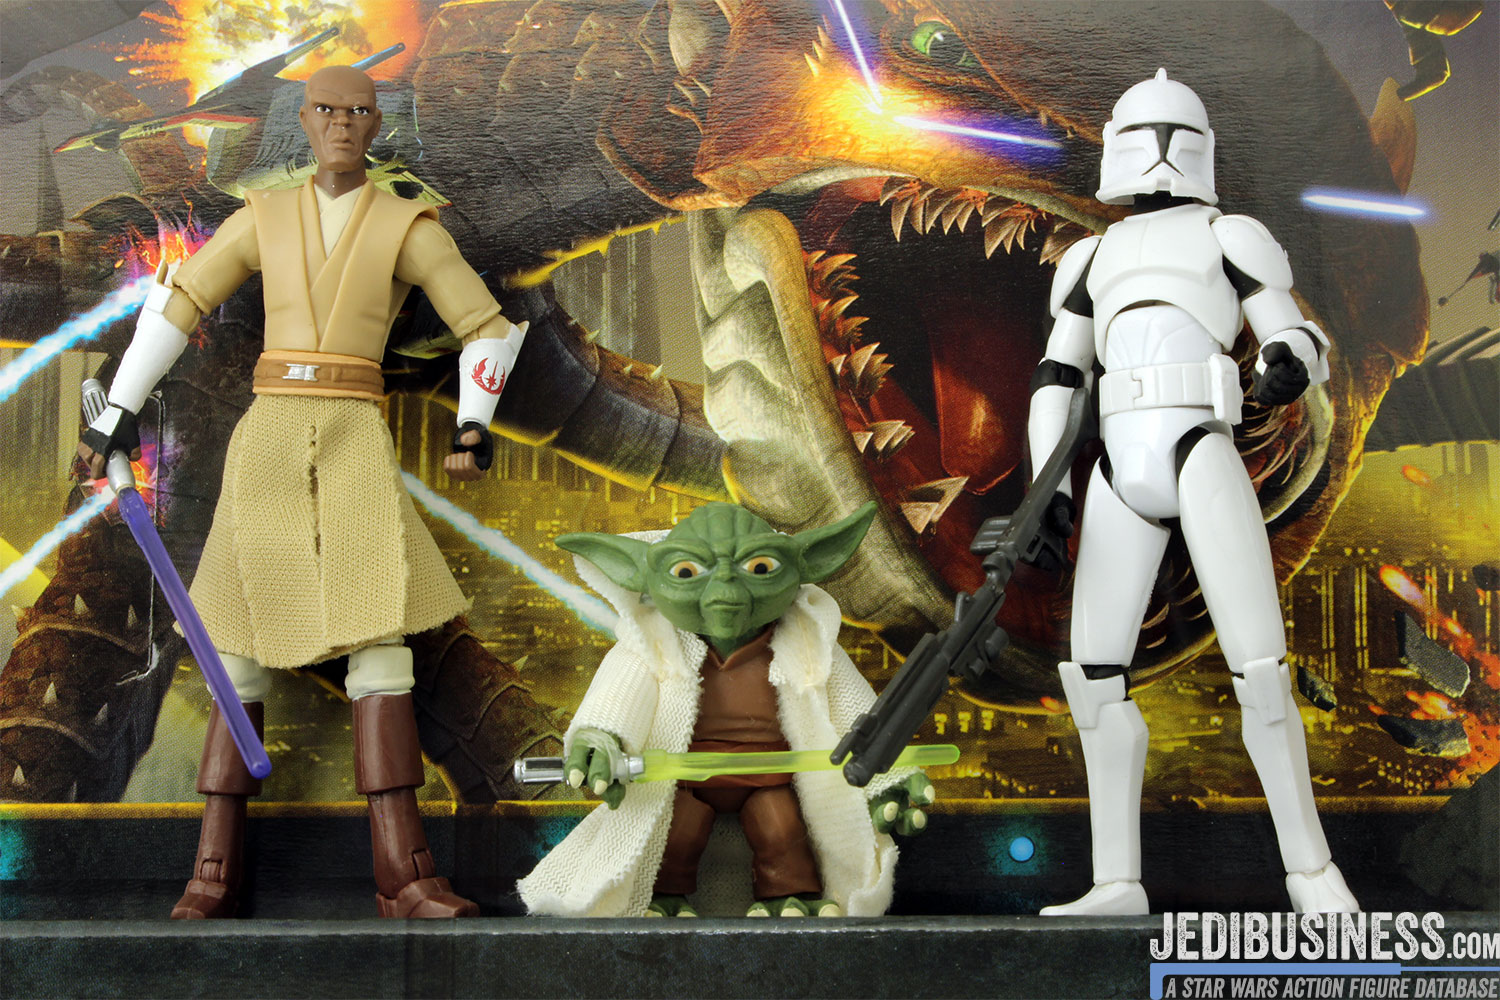 Yoda Stop The Zillo Beast 3-Pack